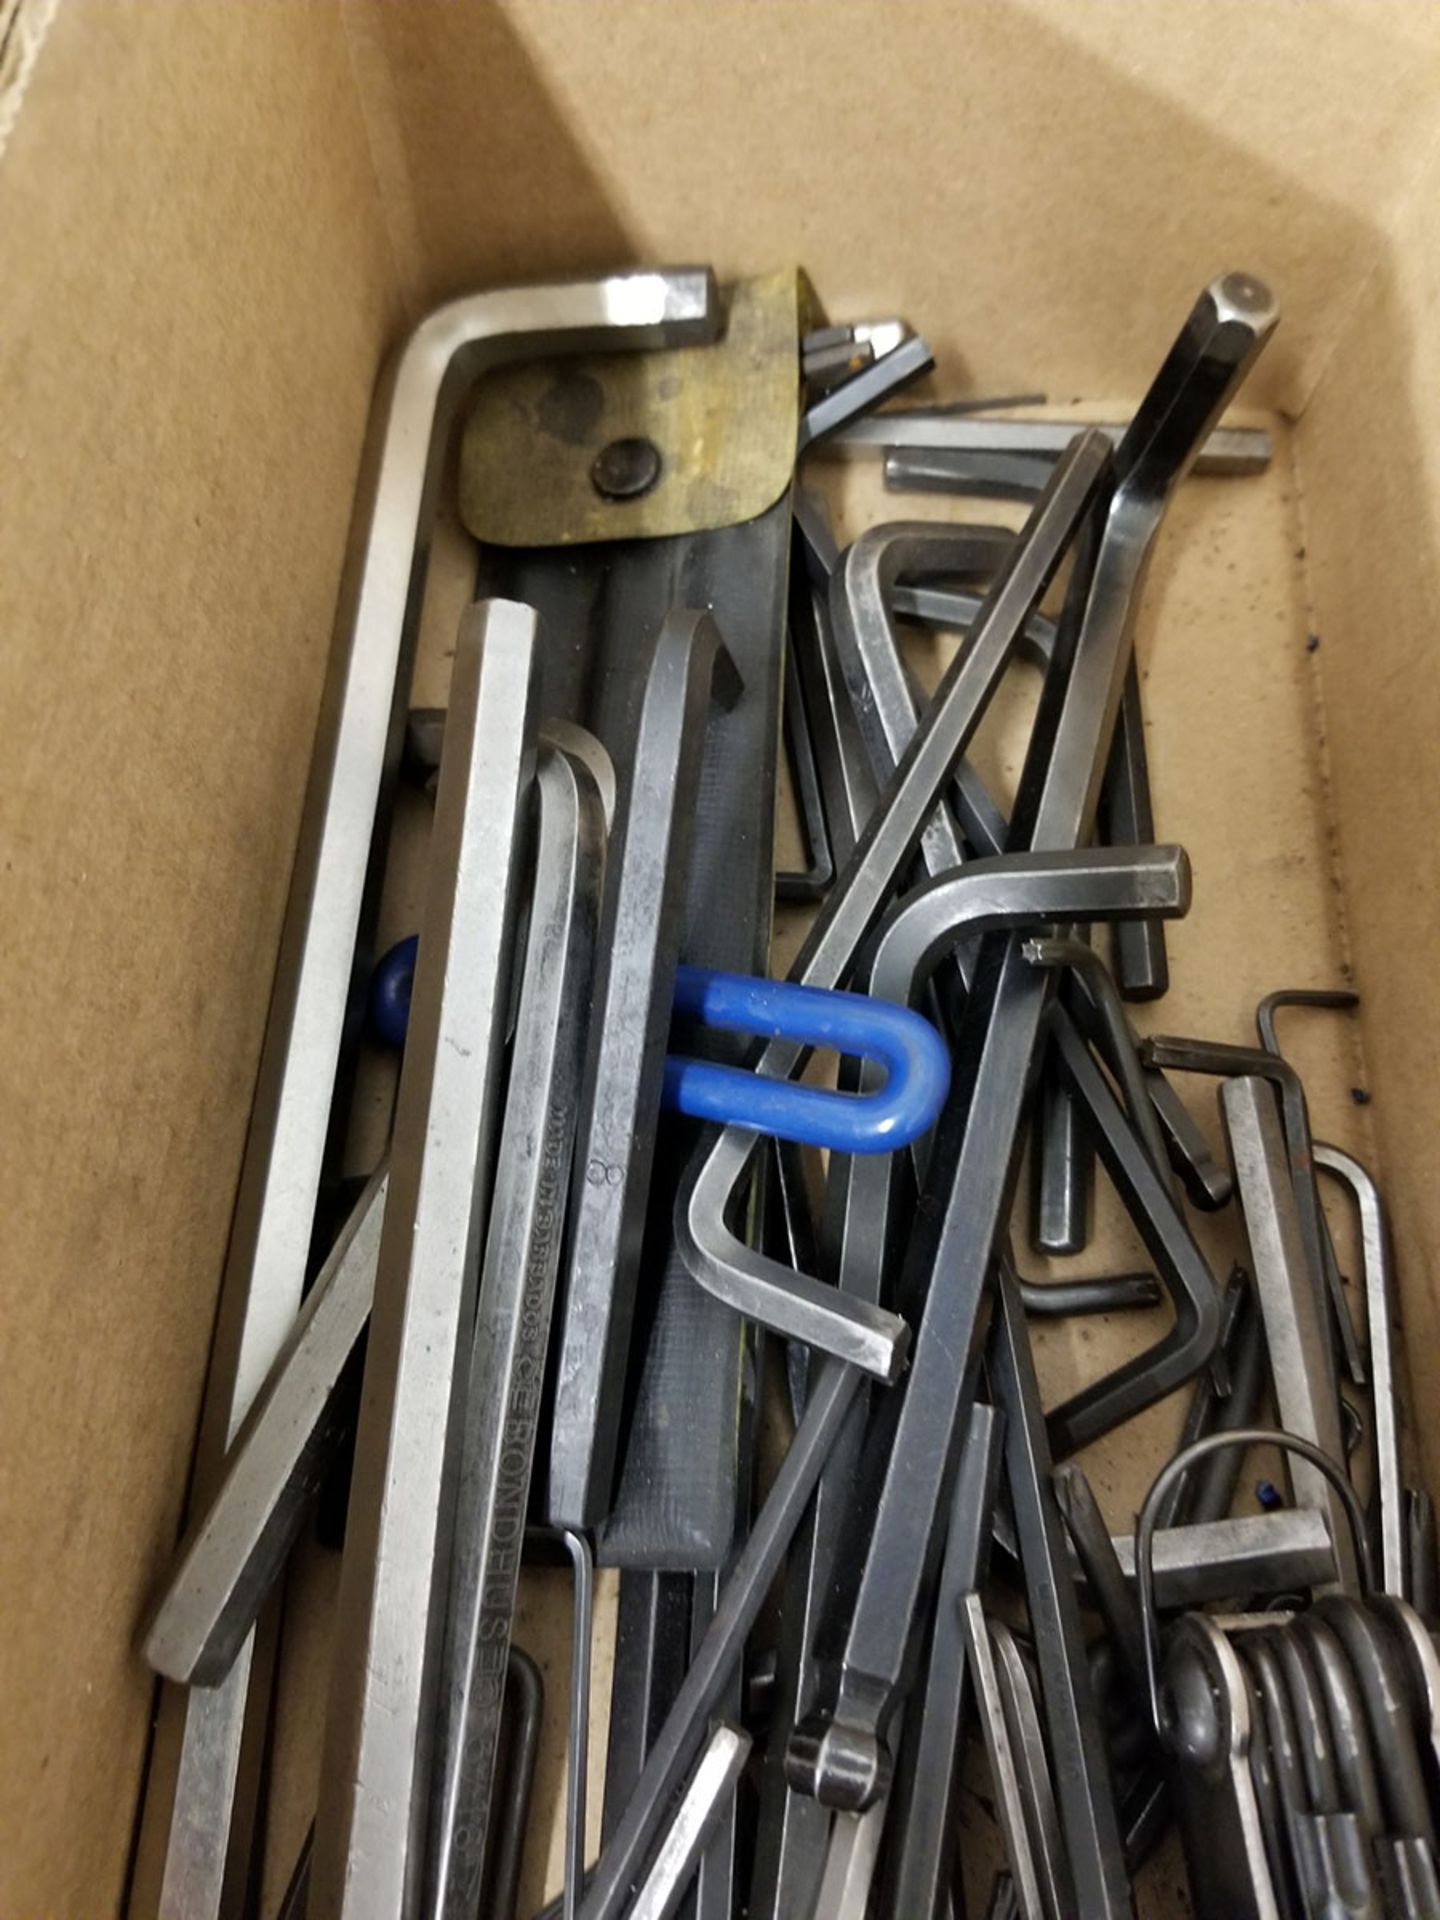 BOX OF ALLEN WRENCHES HEX KEY WRENCHES, ASSORTED SIZES - Image 4 of 4